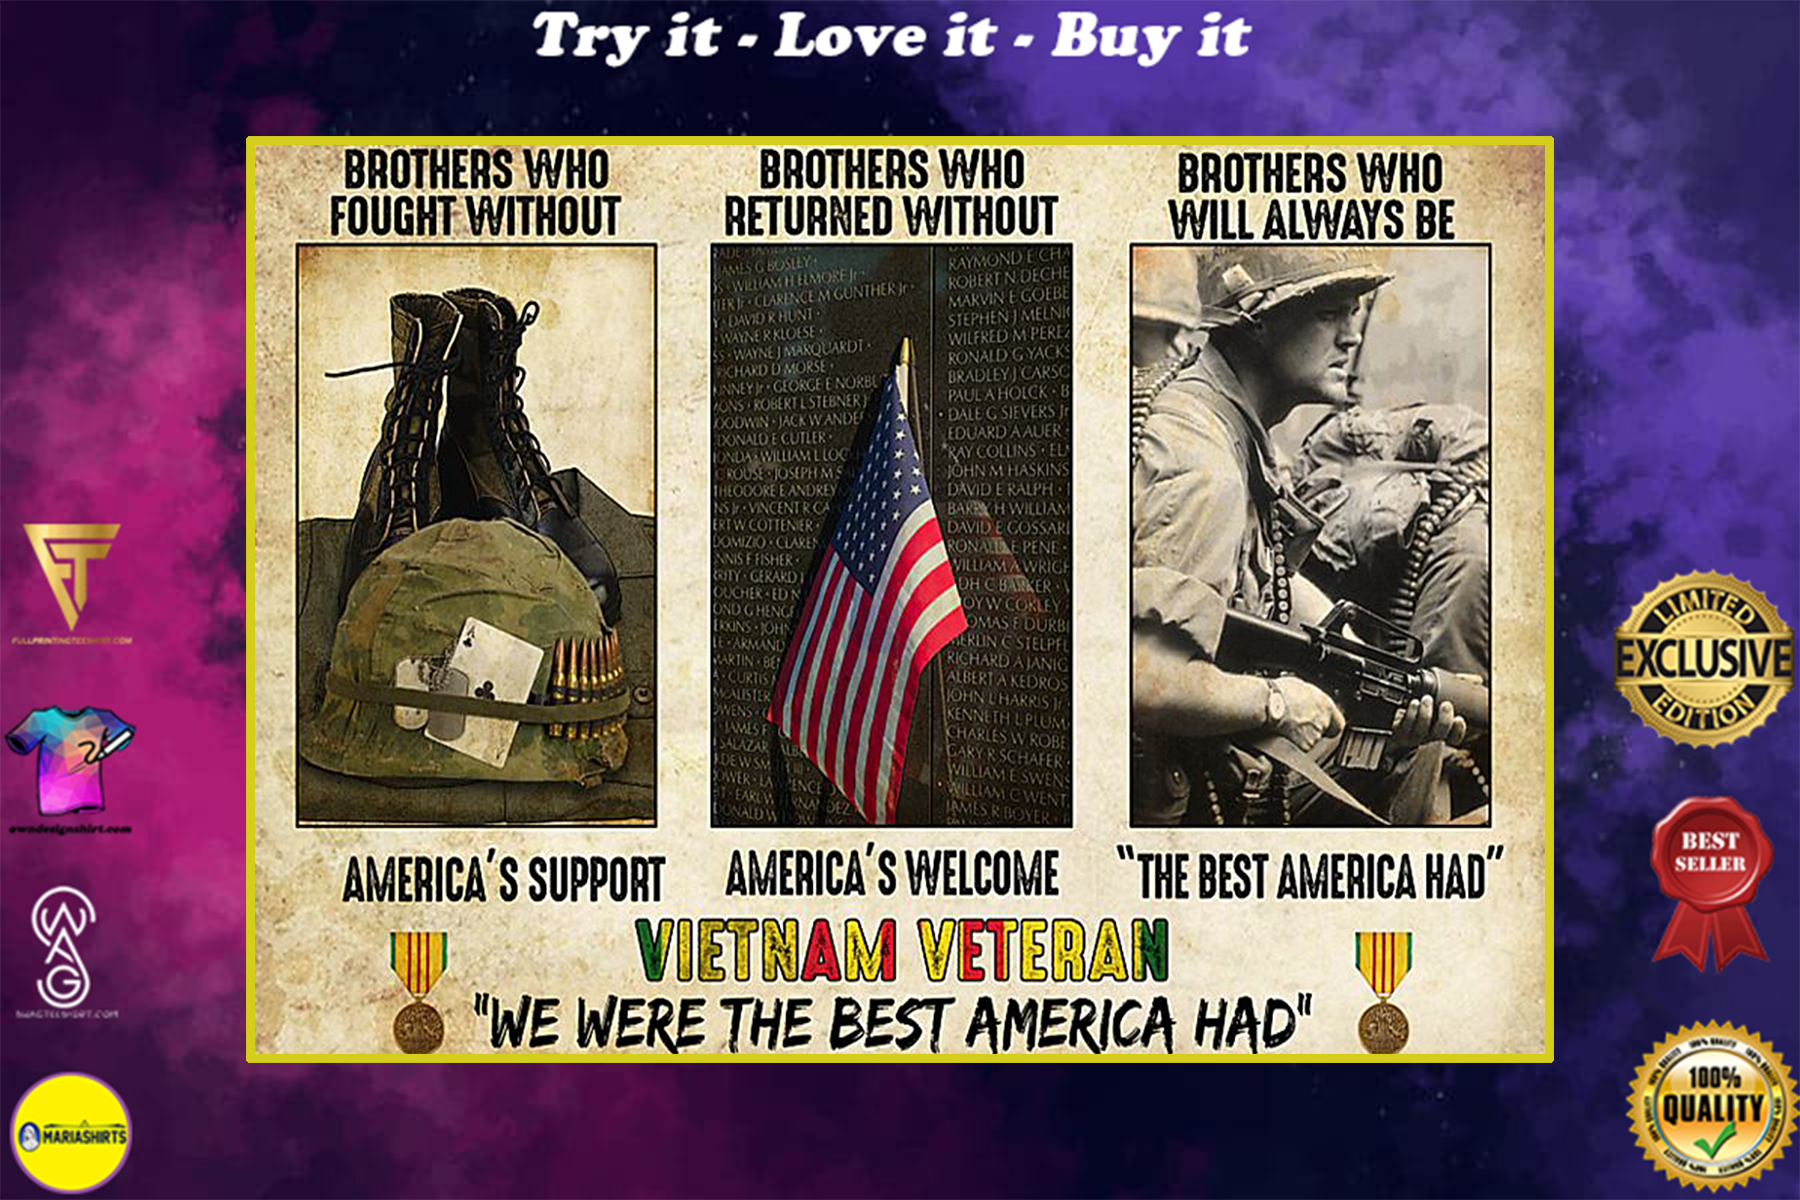 vietnam veteran were the best america had brothers who fought without americas support poster